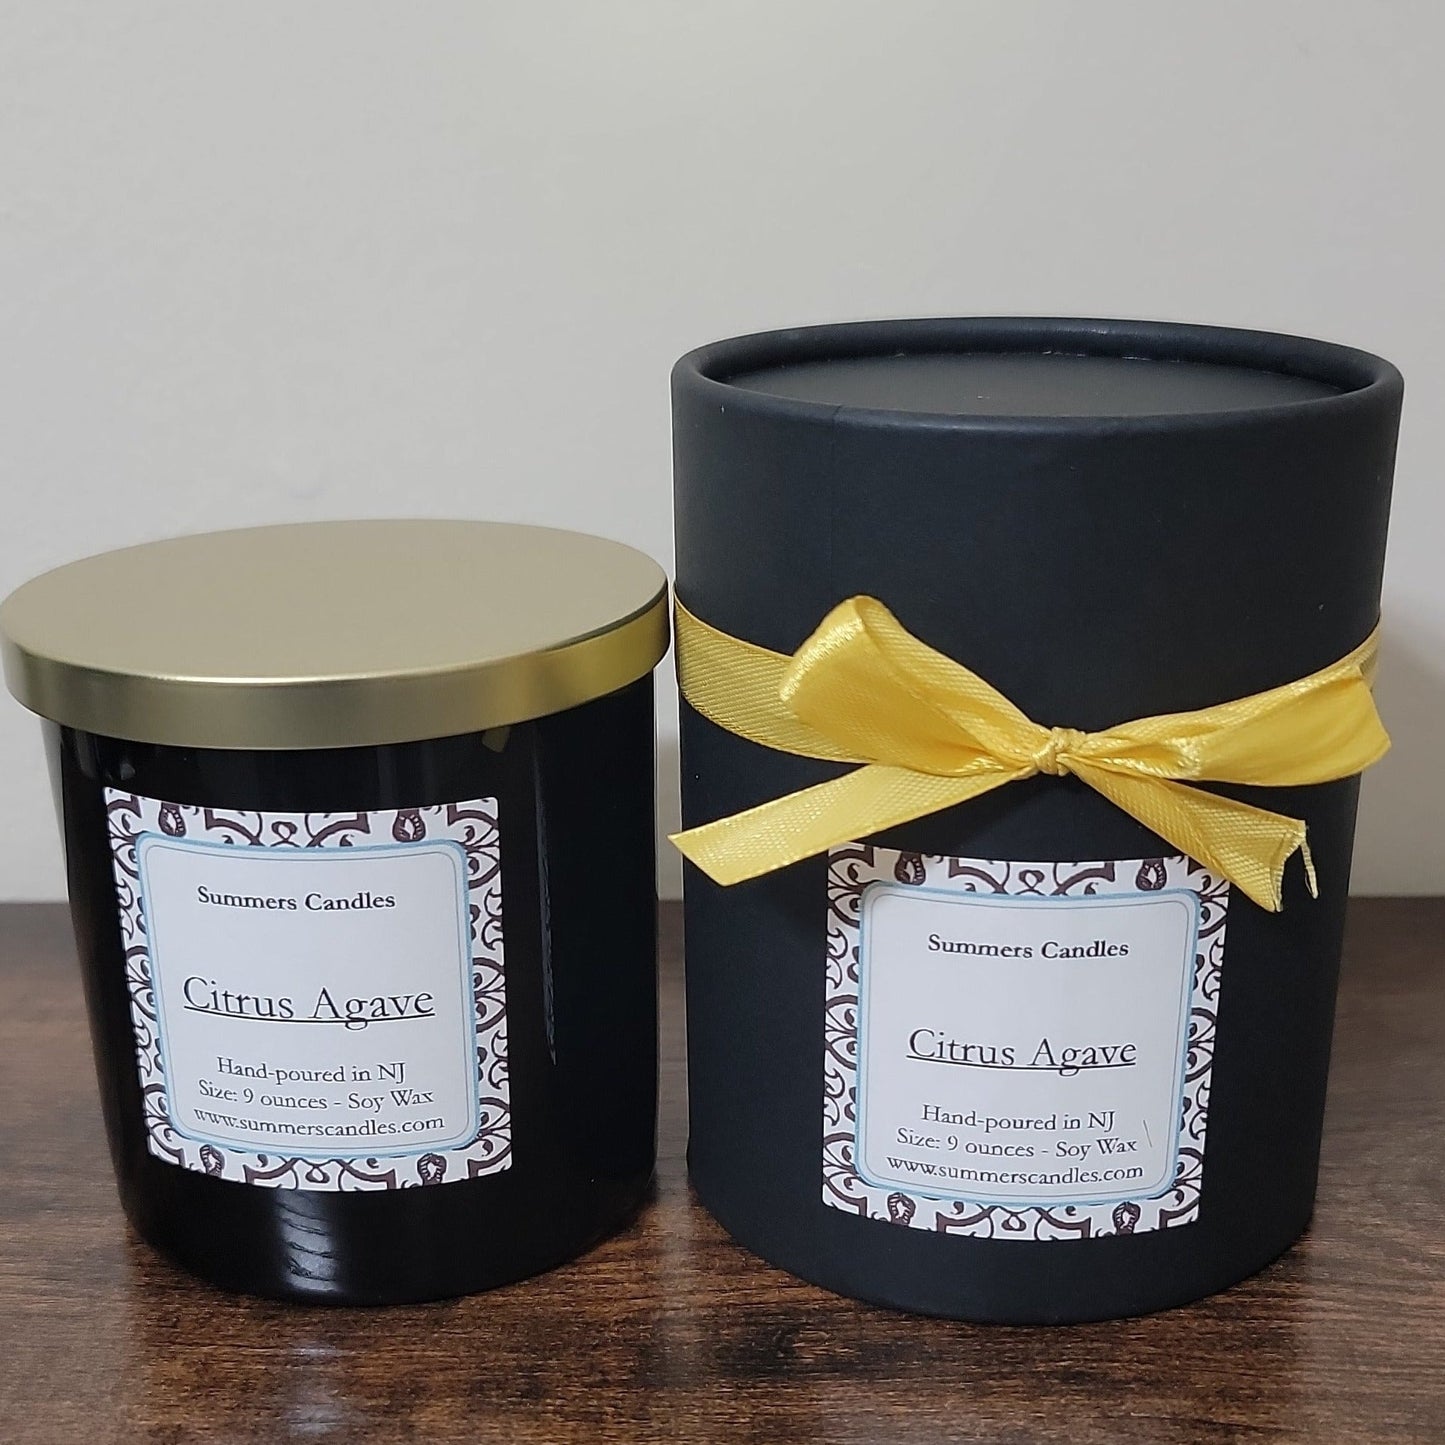 Citrus Agave Candles